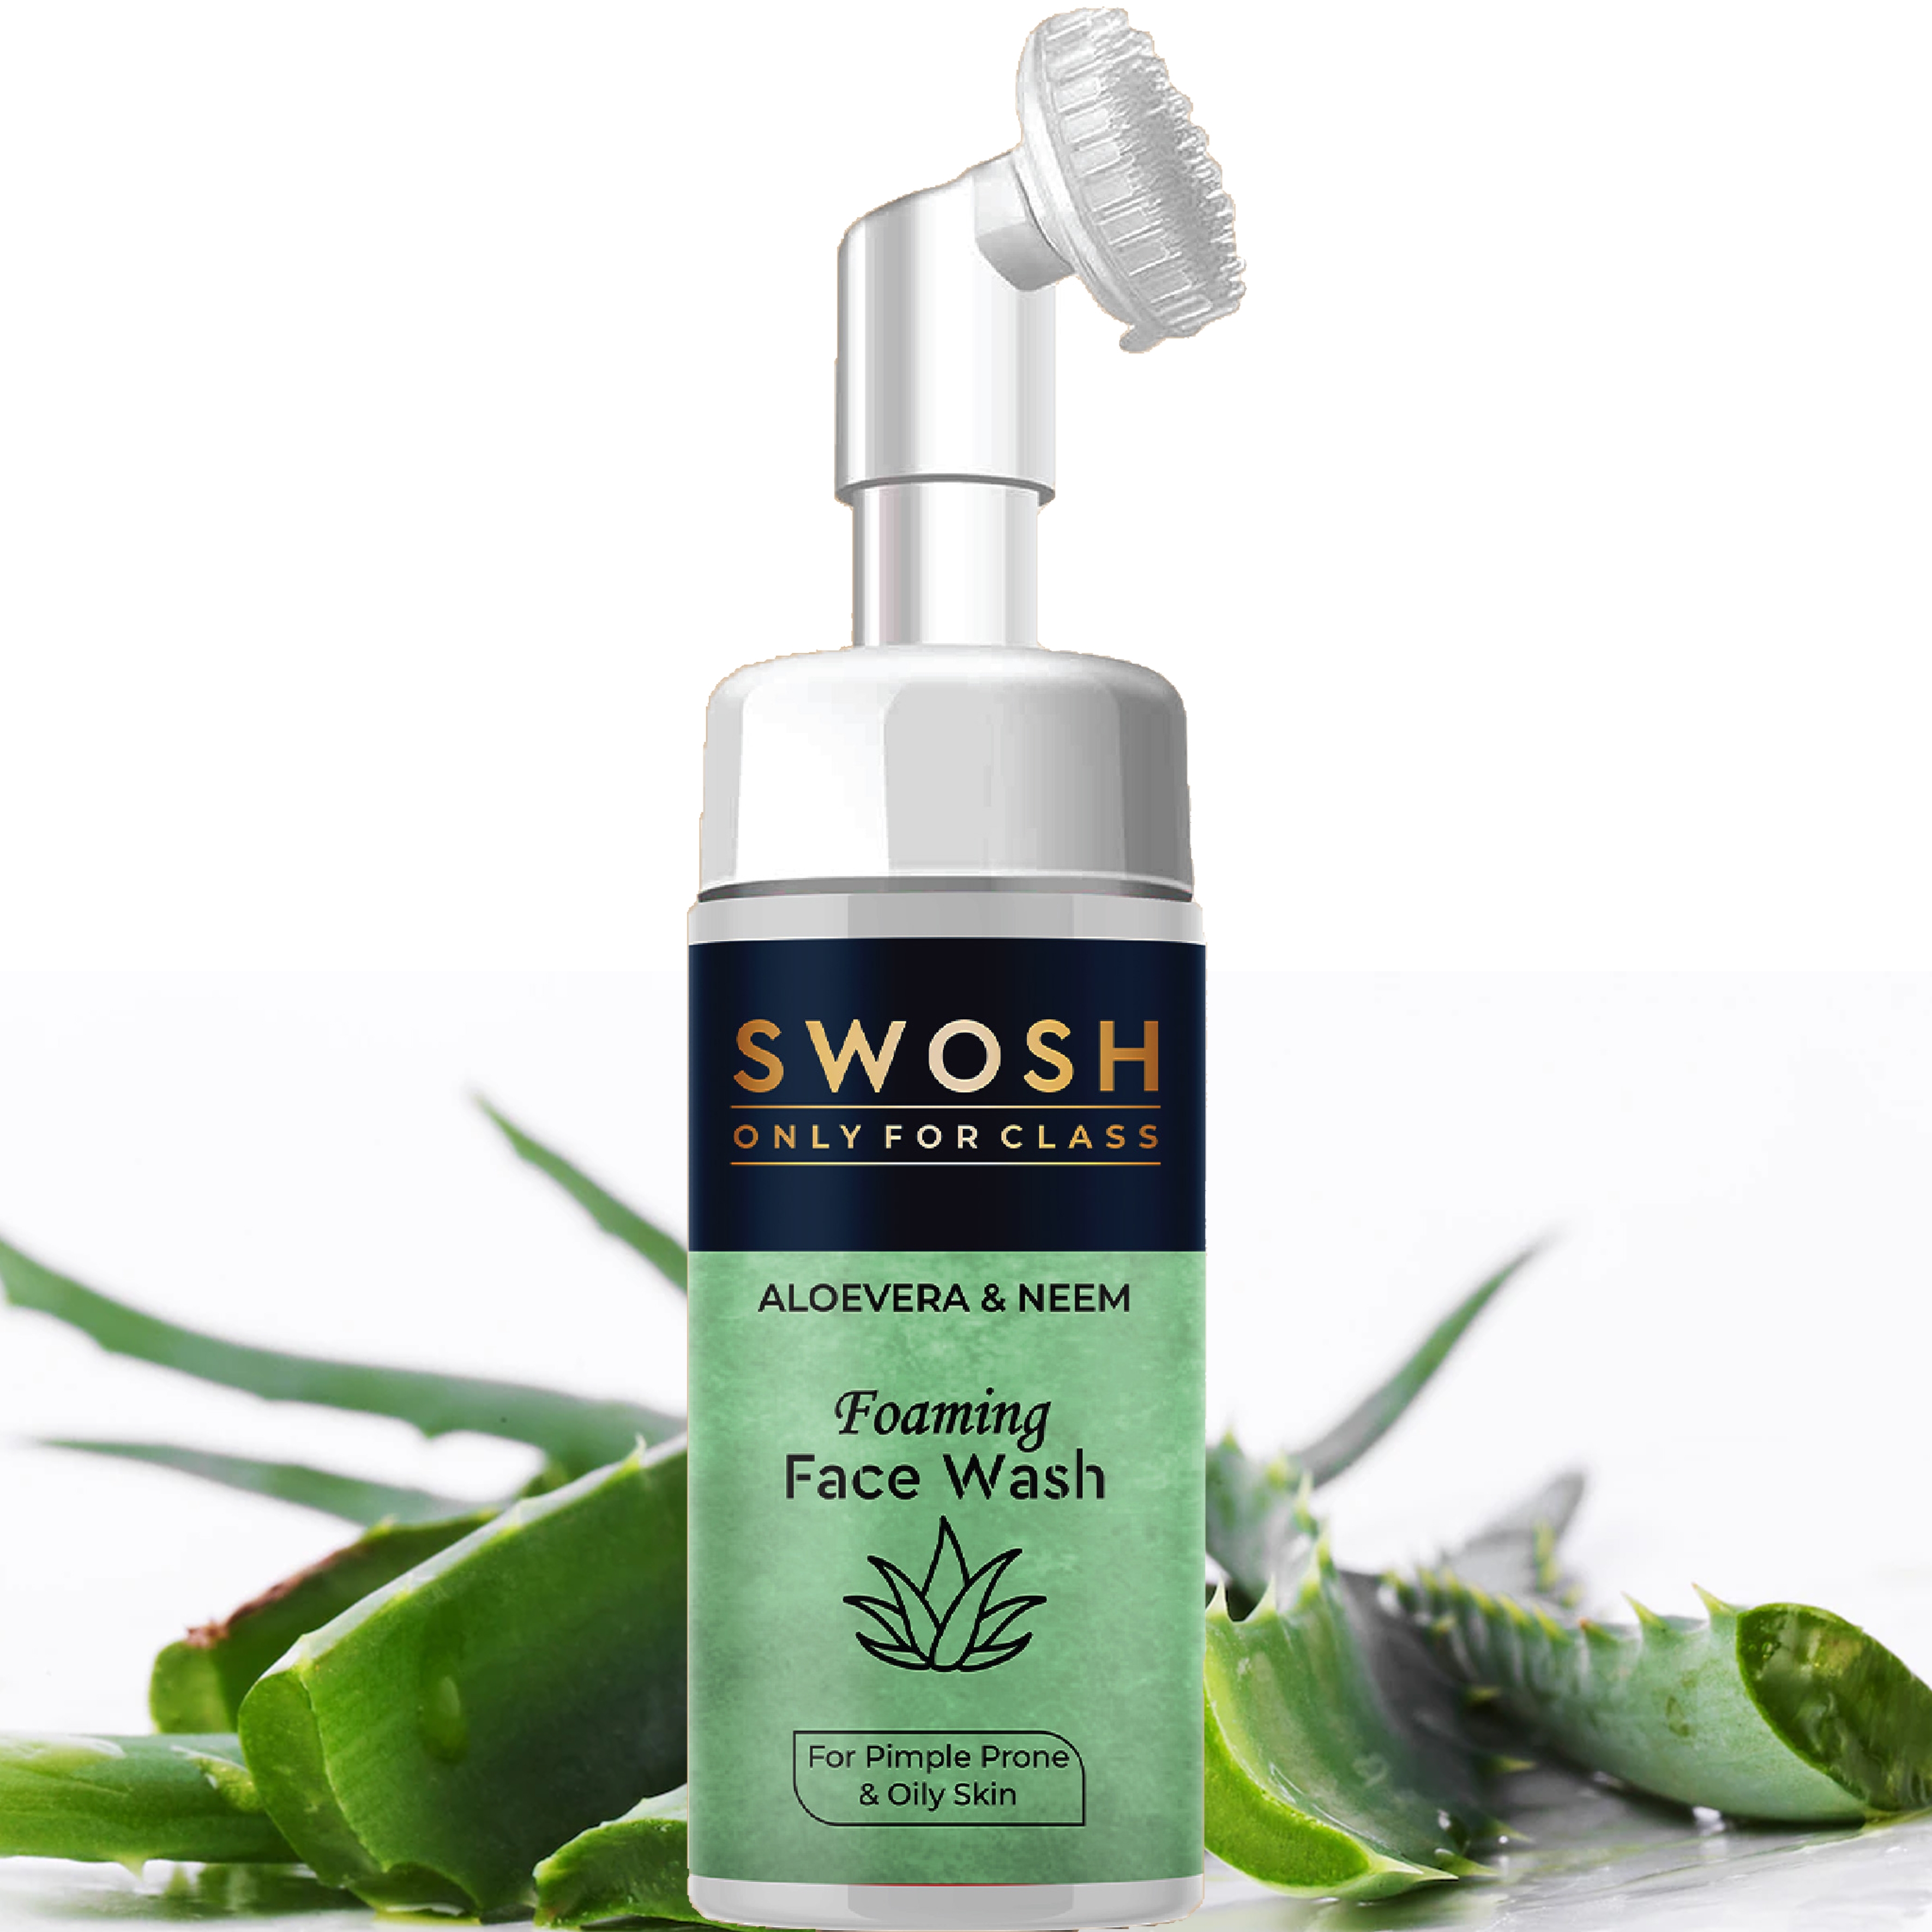 SWOSH | SWOSH Aloe Vera & Neem Foaming Face Wash For Pimple Prone & Oily Skin- No Parabens, Sulphate, Silicones & Color (with Built-in Face Brush), 100 ml